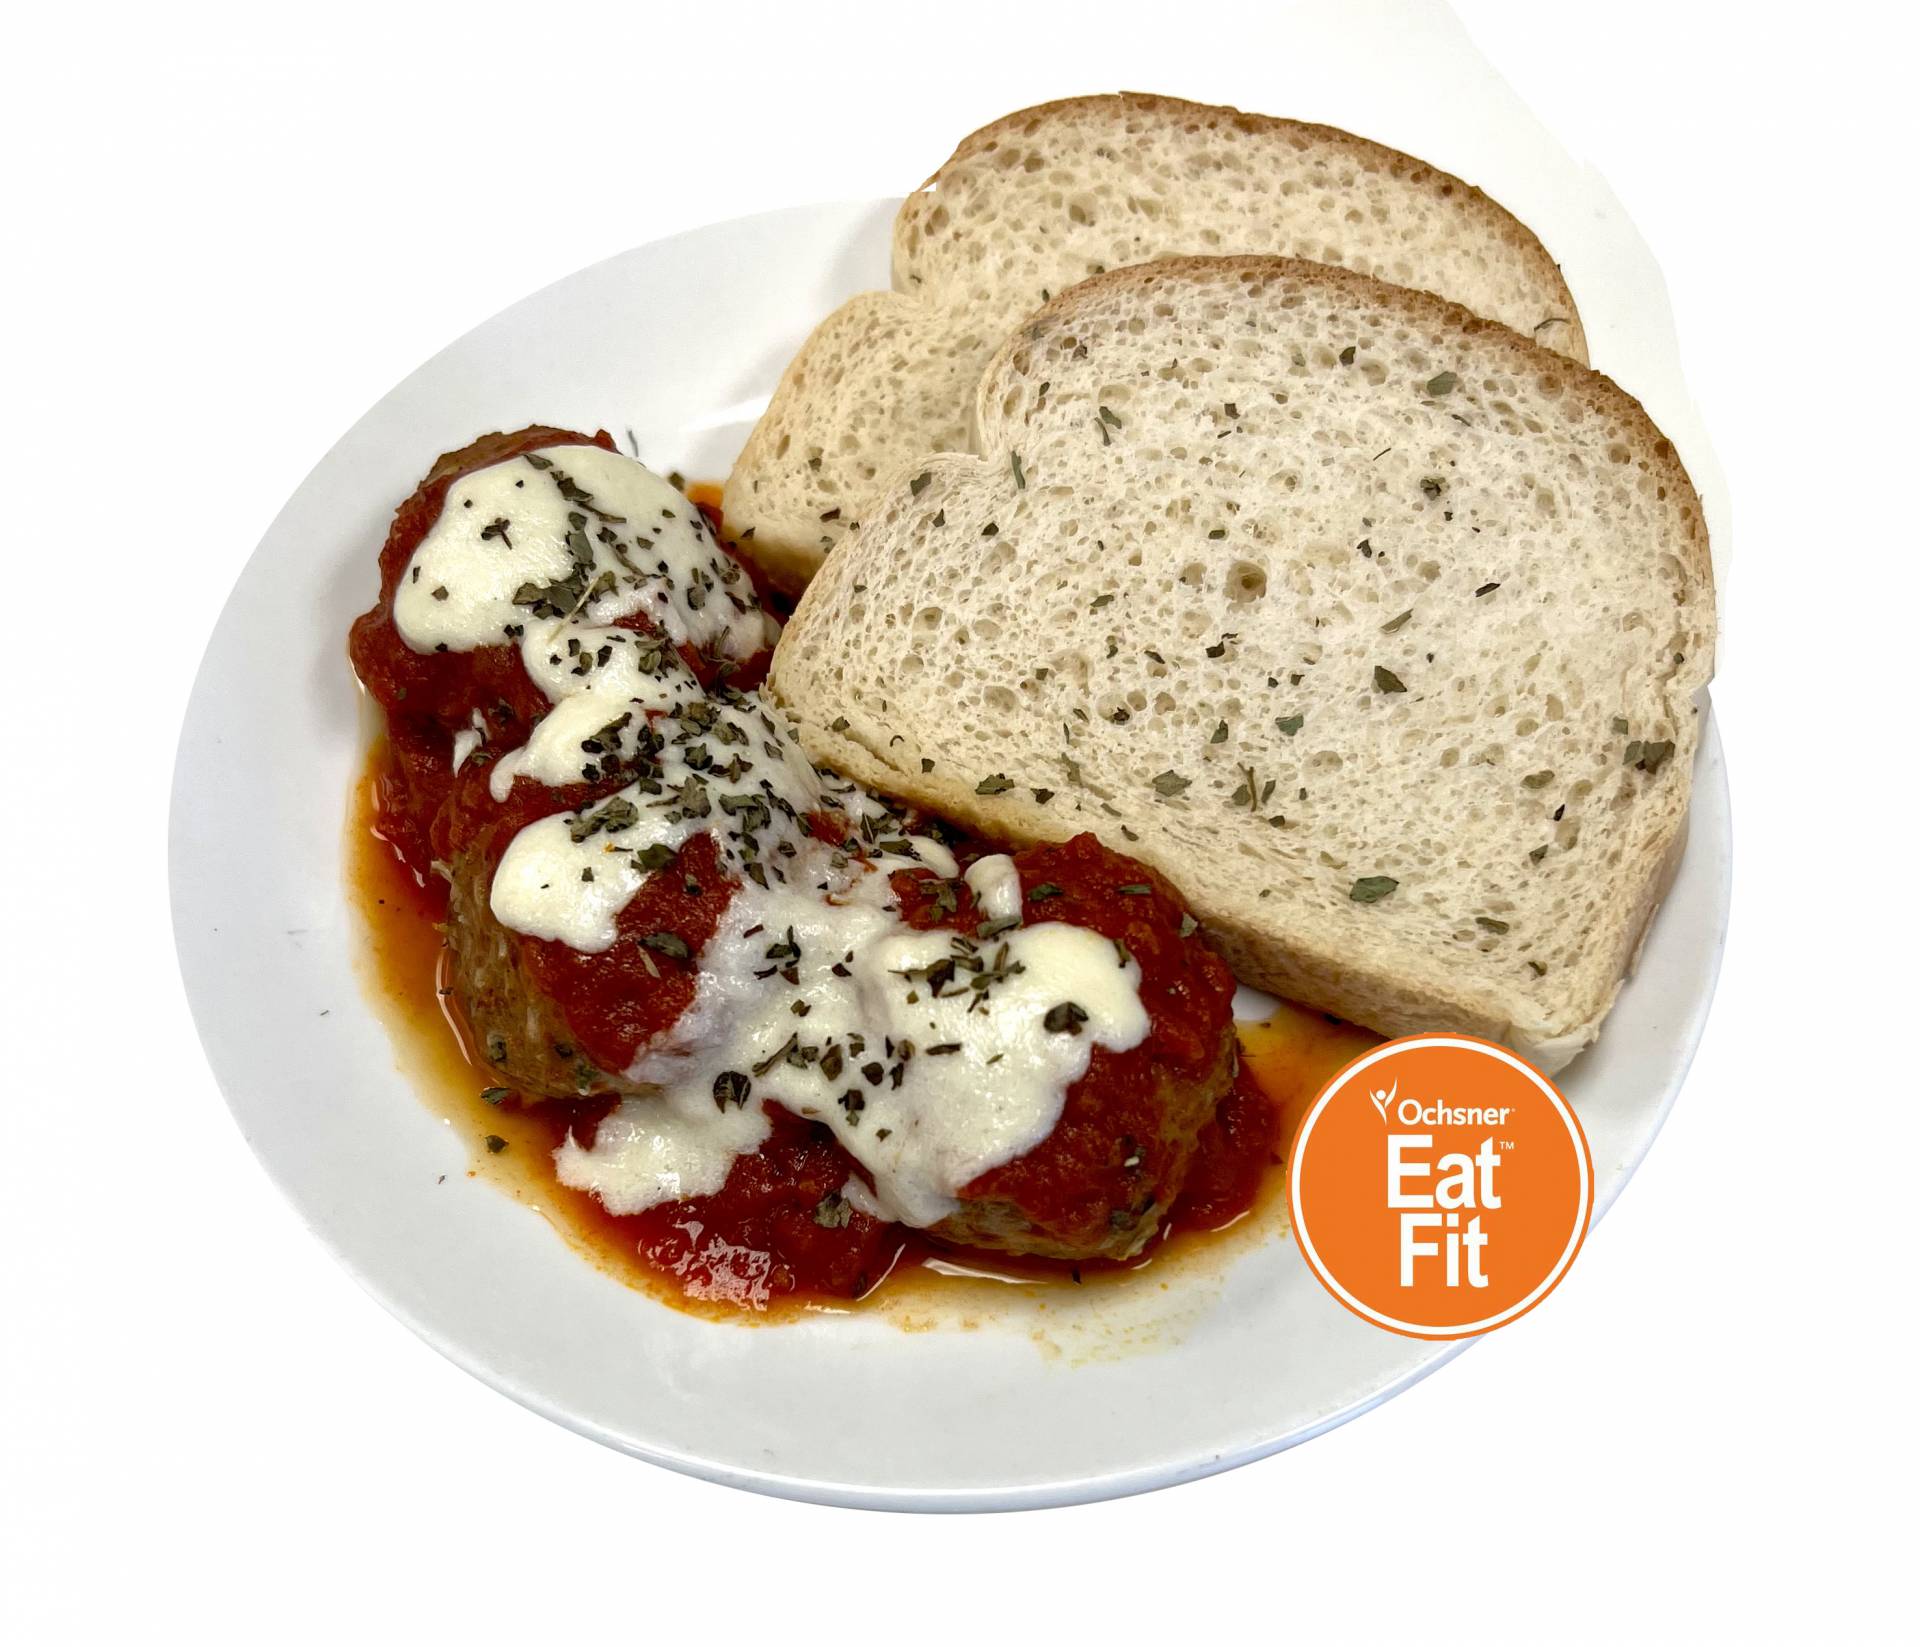 Italian Turkey Meatballs with Red Sauce and Sliced Bread - Low Fat